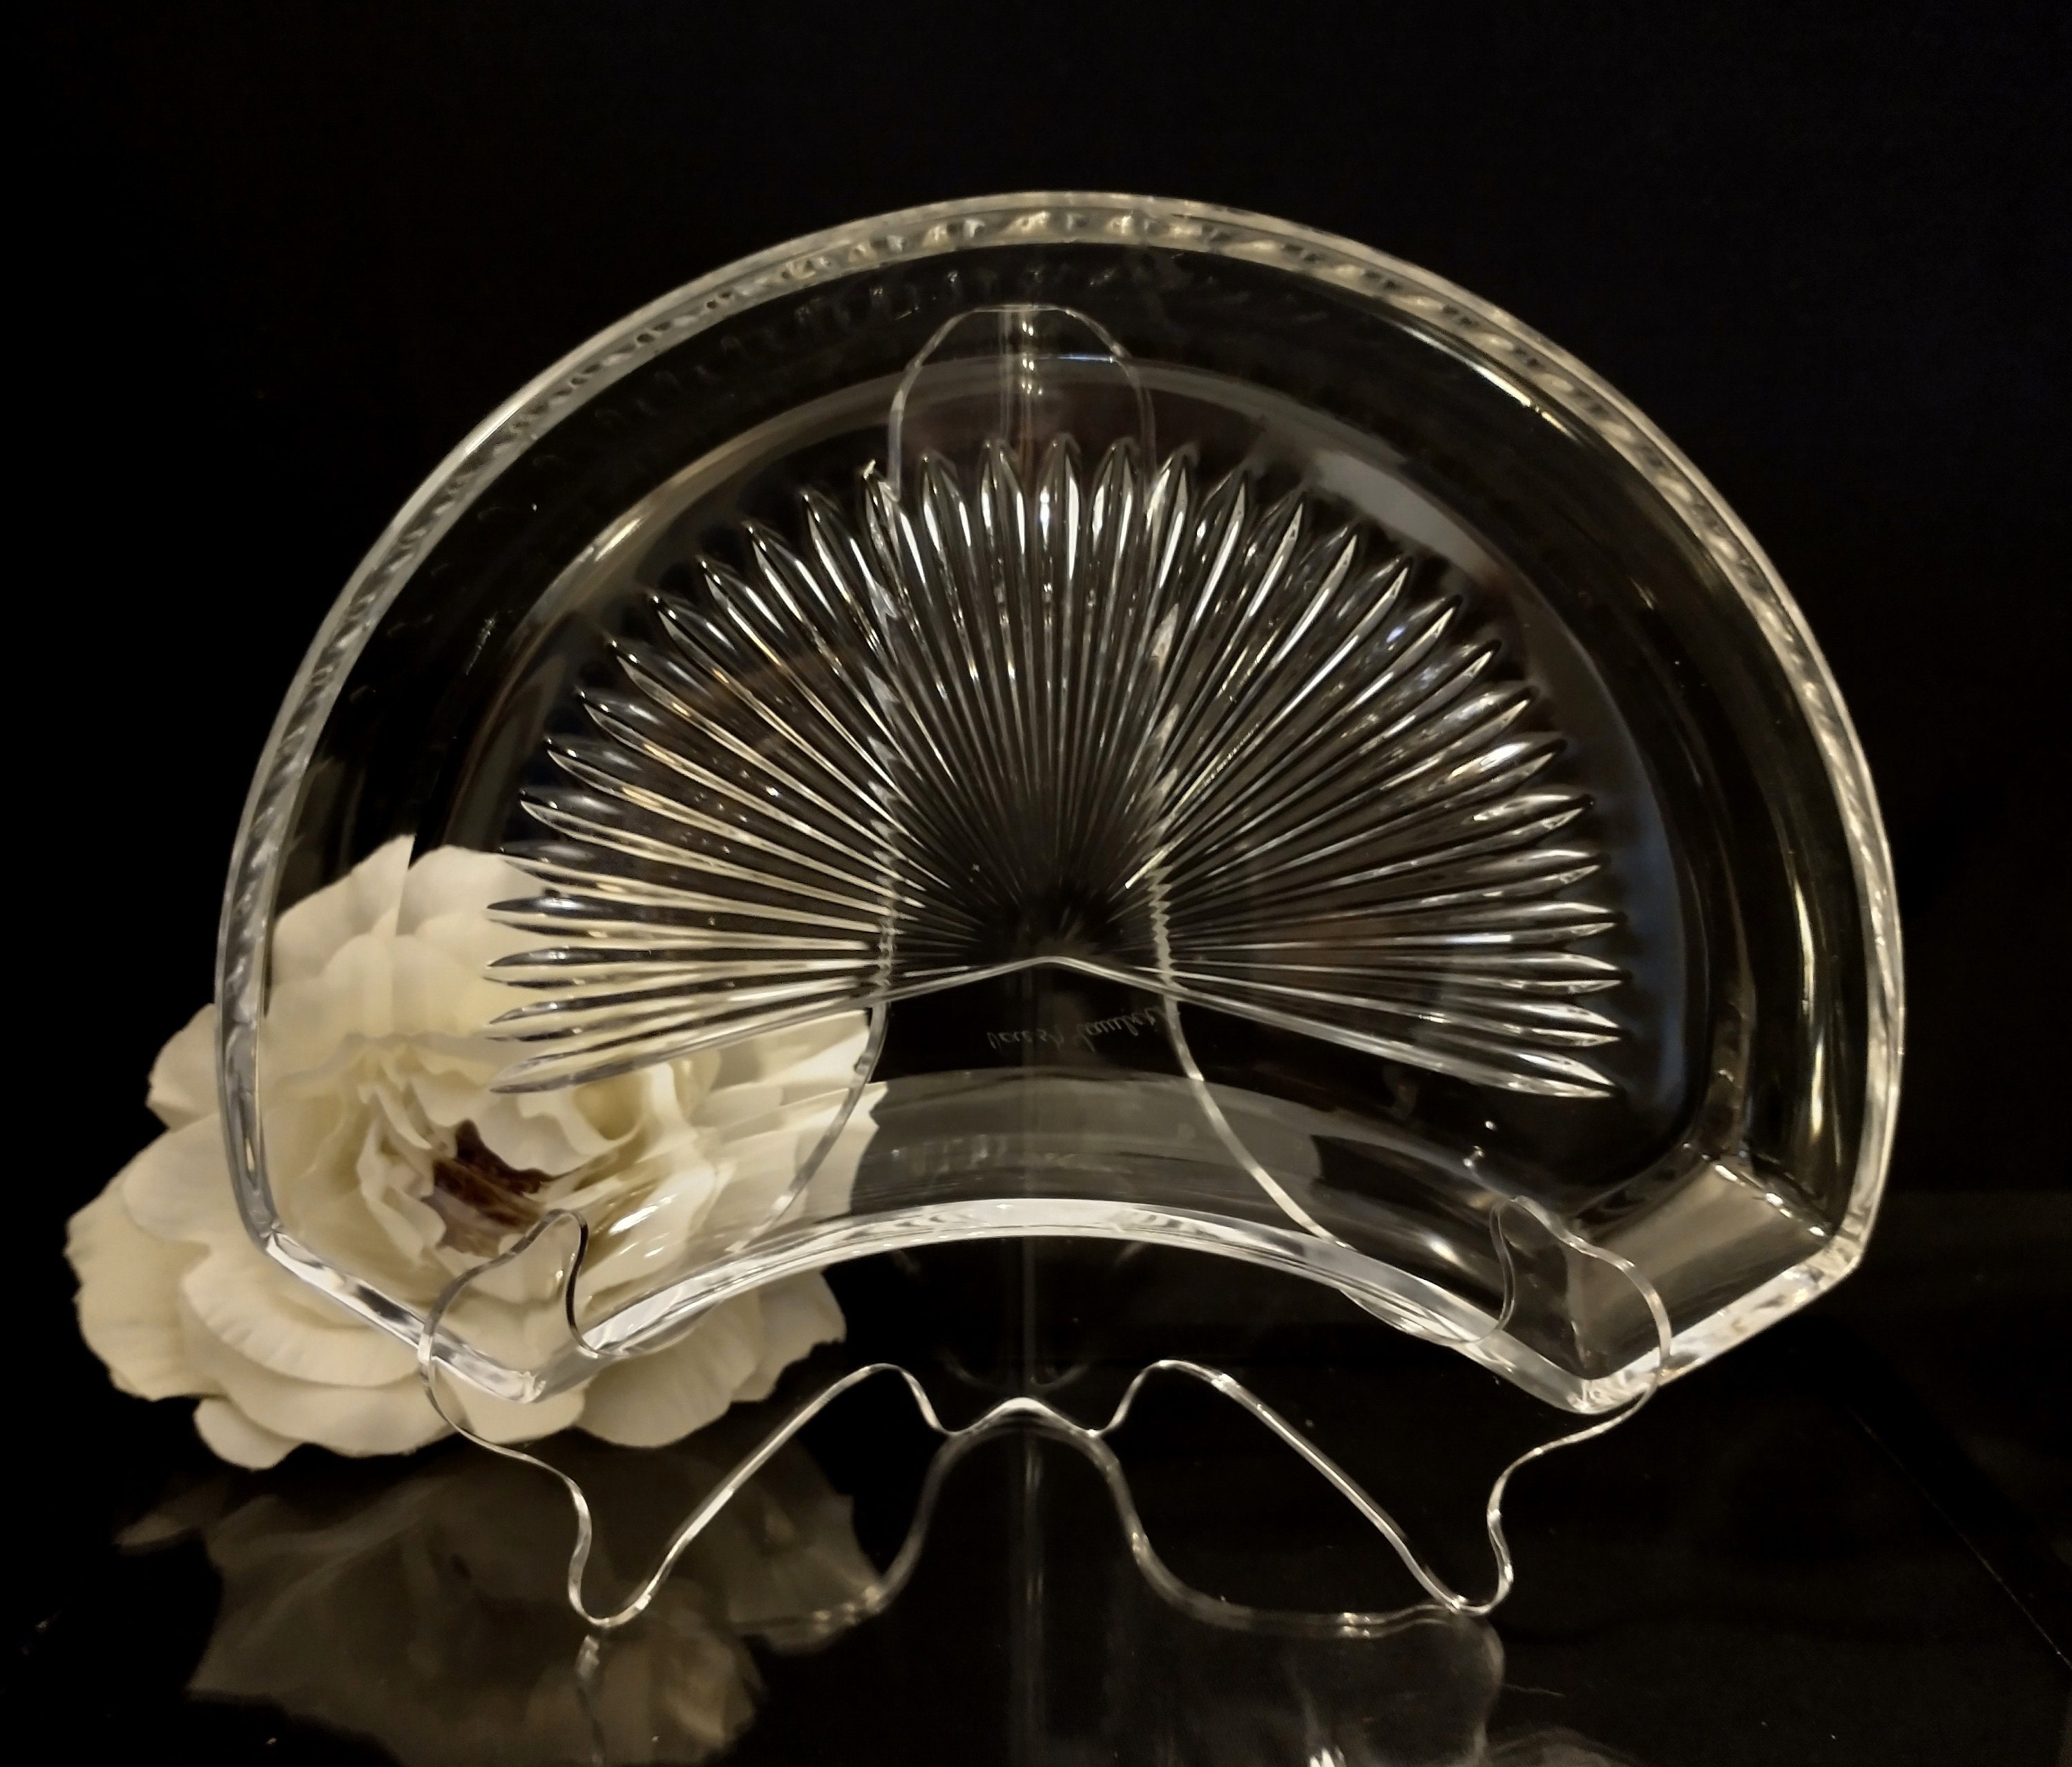 Cut Crystal Glass Box from Val St Lambert, Belgium, 1950s for sale at Pamono